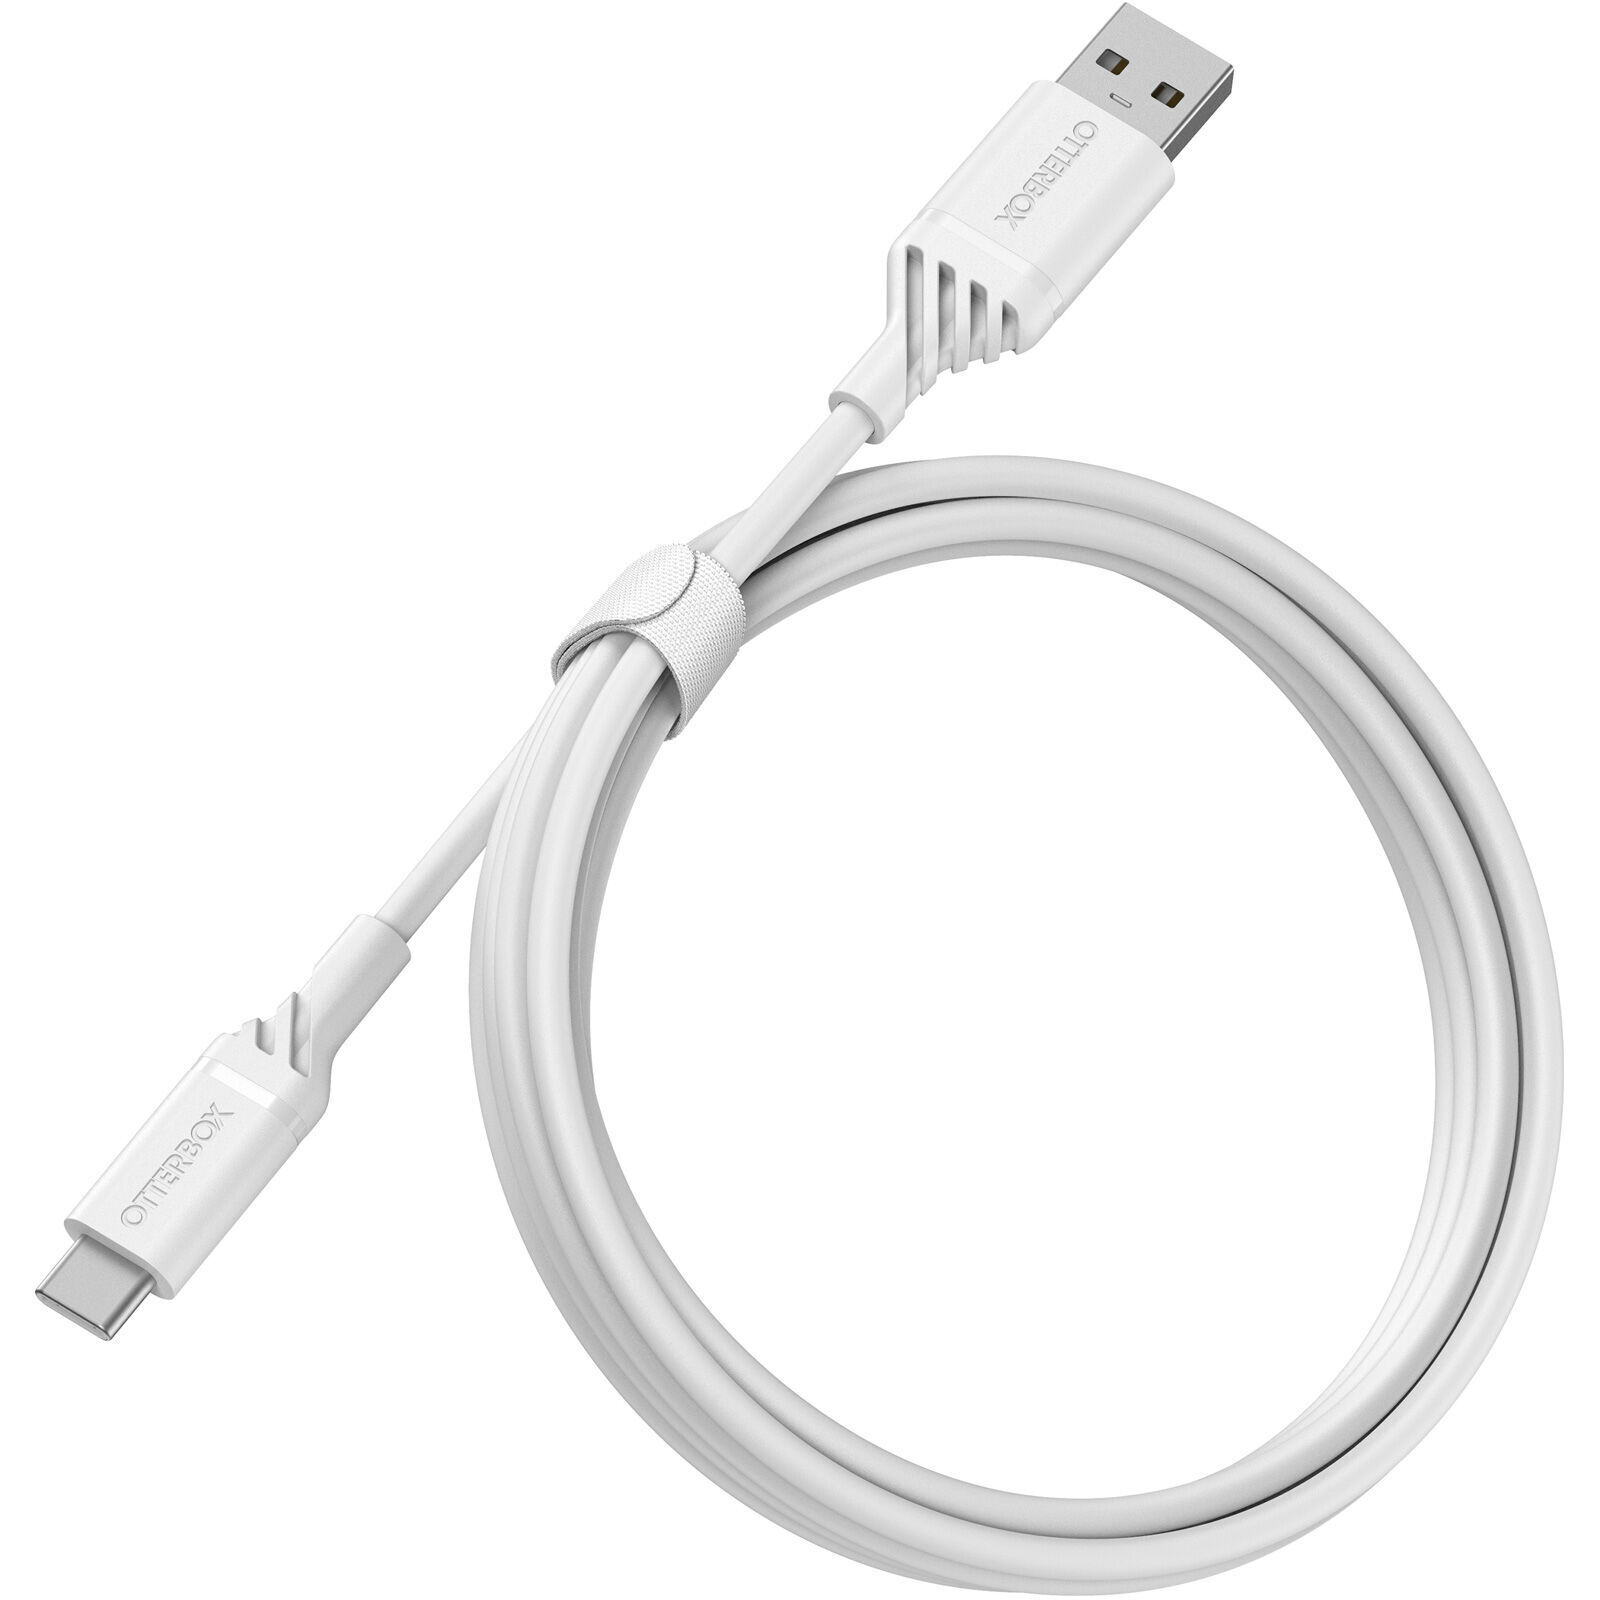 OtterBox USB-C to USB-A (2.0) Cable (1M) - White (78-52536), 3 AMPS (60W), 3K Bend/Flex,Samsung Galaxy,Apple iPhone,iPad,MacBook,Google,OPPO,Nokia